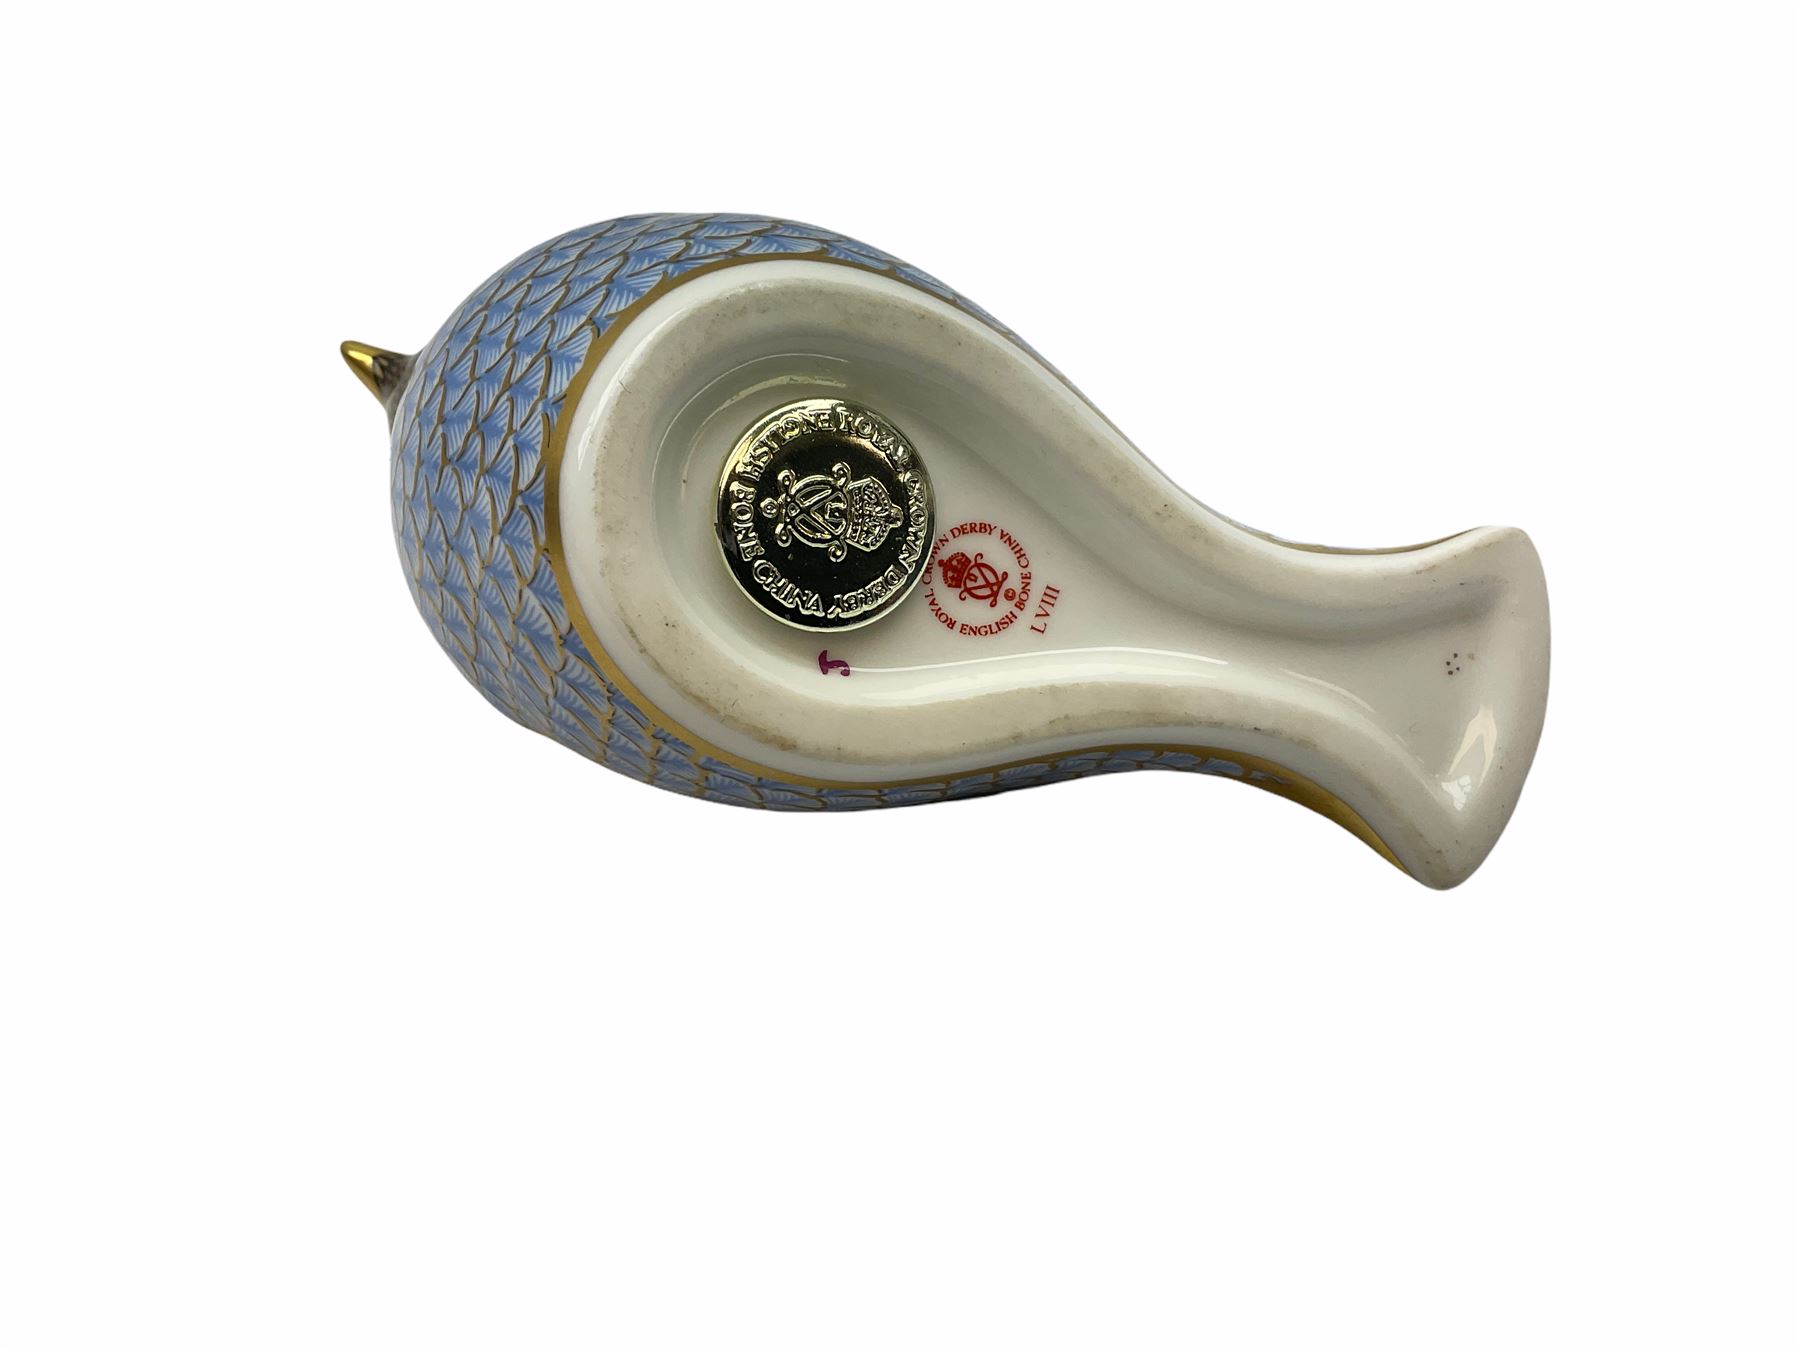 Royal Crown Derby paperweight modelled as a bird - Image 9 of 9